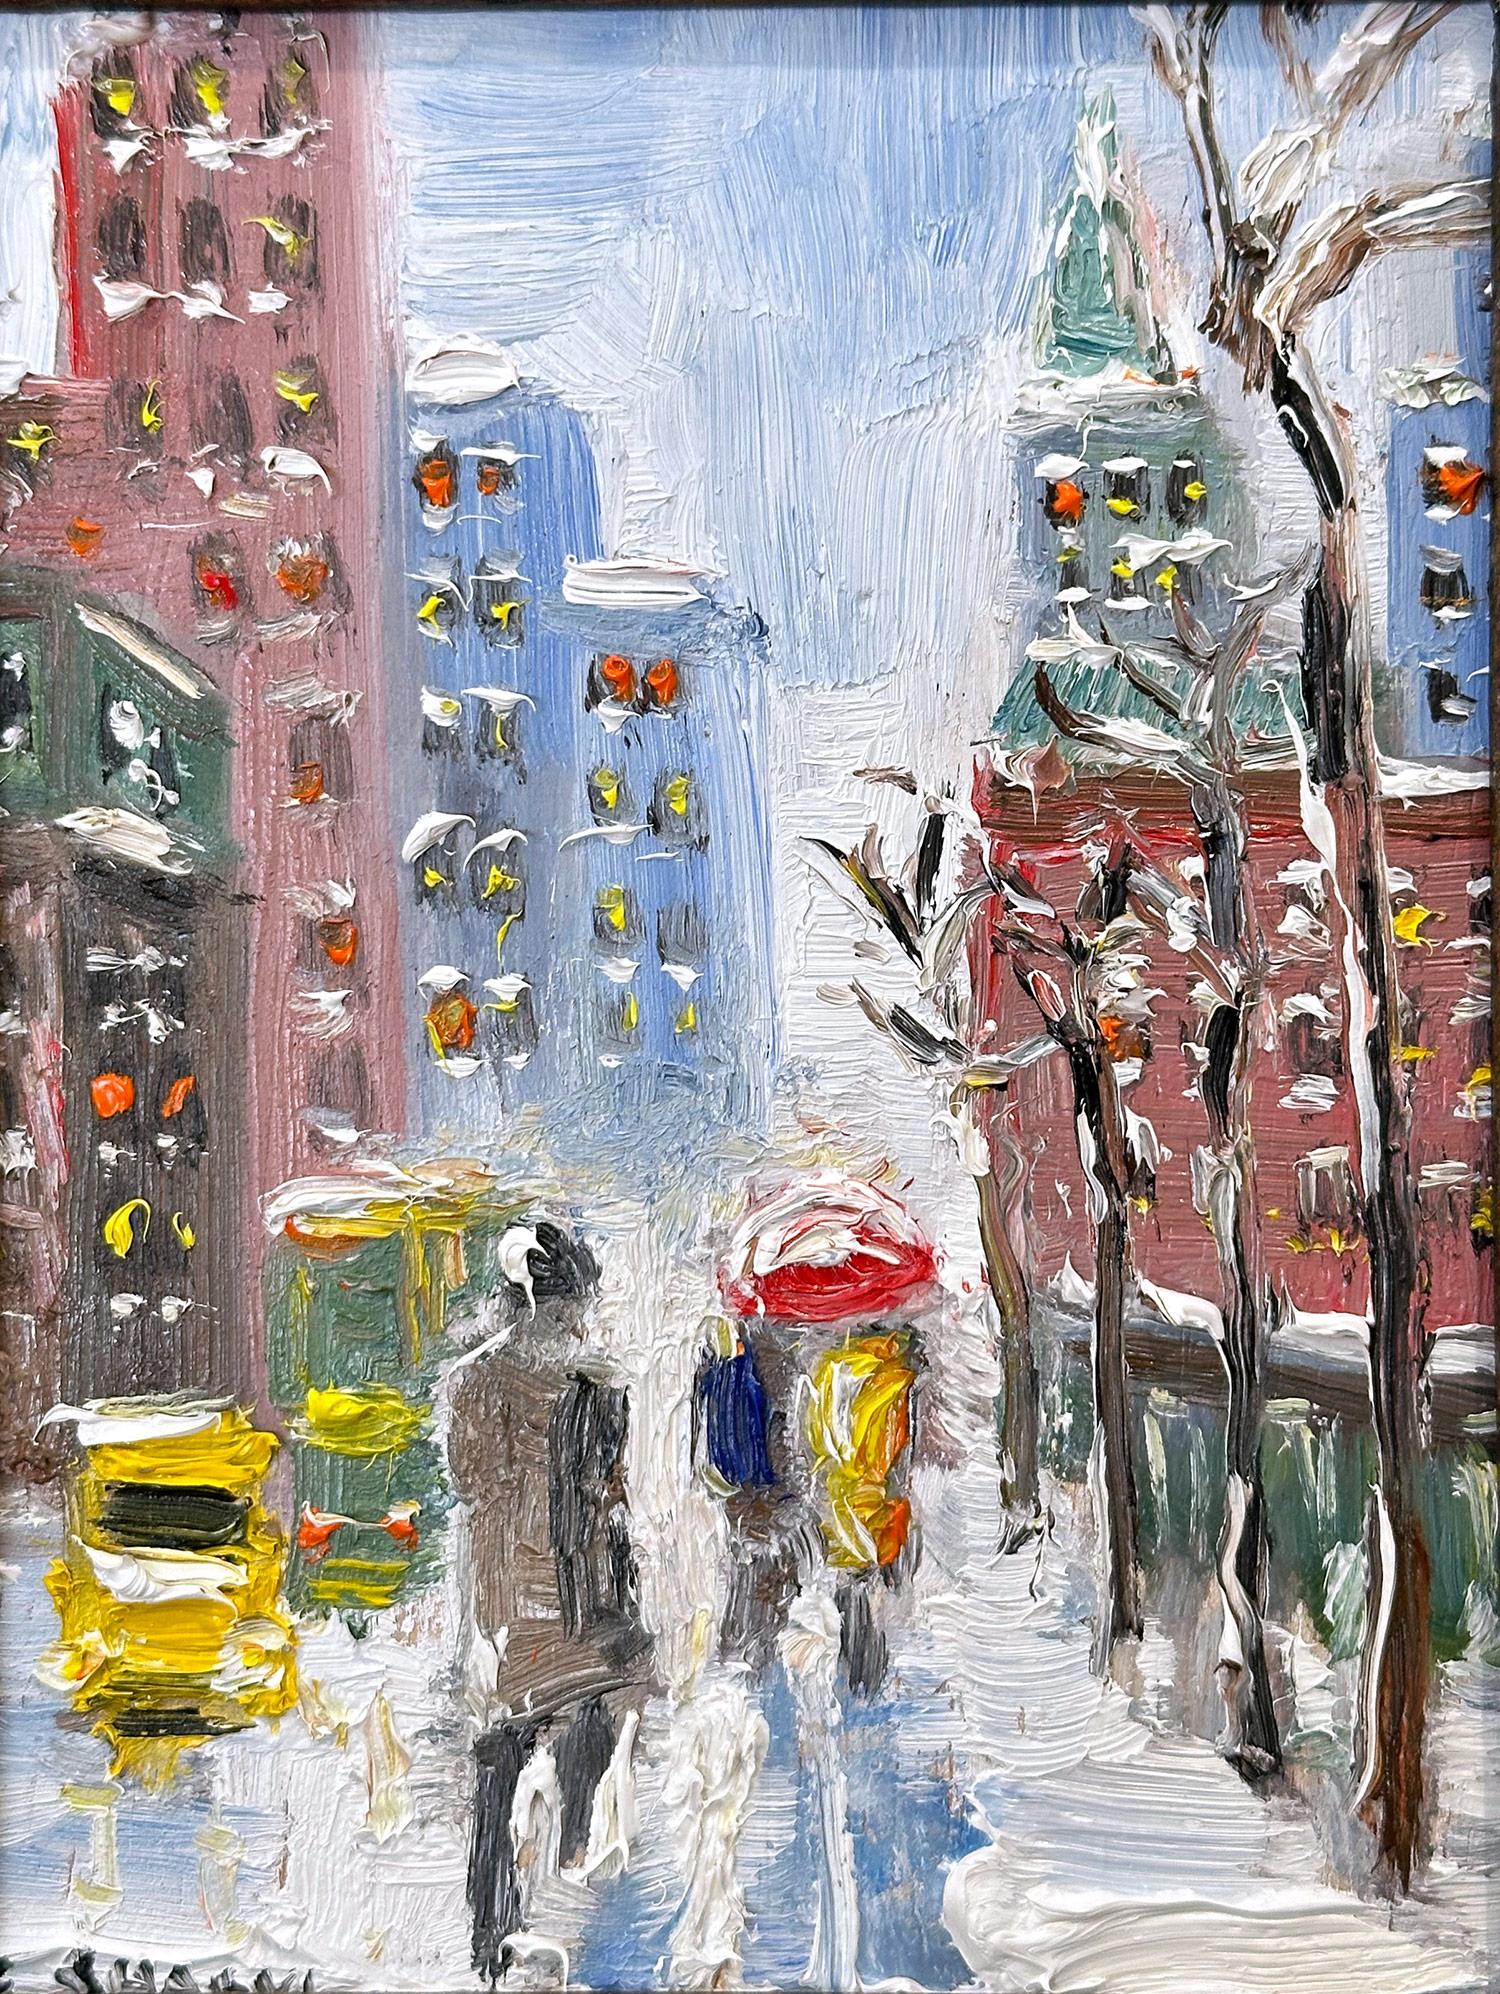 A charming depiction of Snow in Downtown New York City with figures walking and taxis in the distance. A cozy impressionistic street scene with colors of cobalts, light pink, whites, and burnt sienna's. An iconic street scene with beautiful